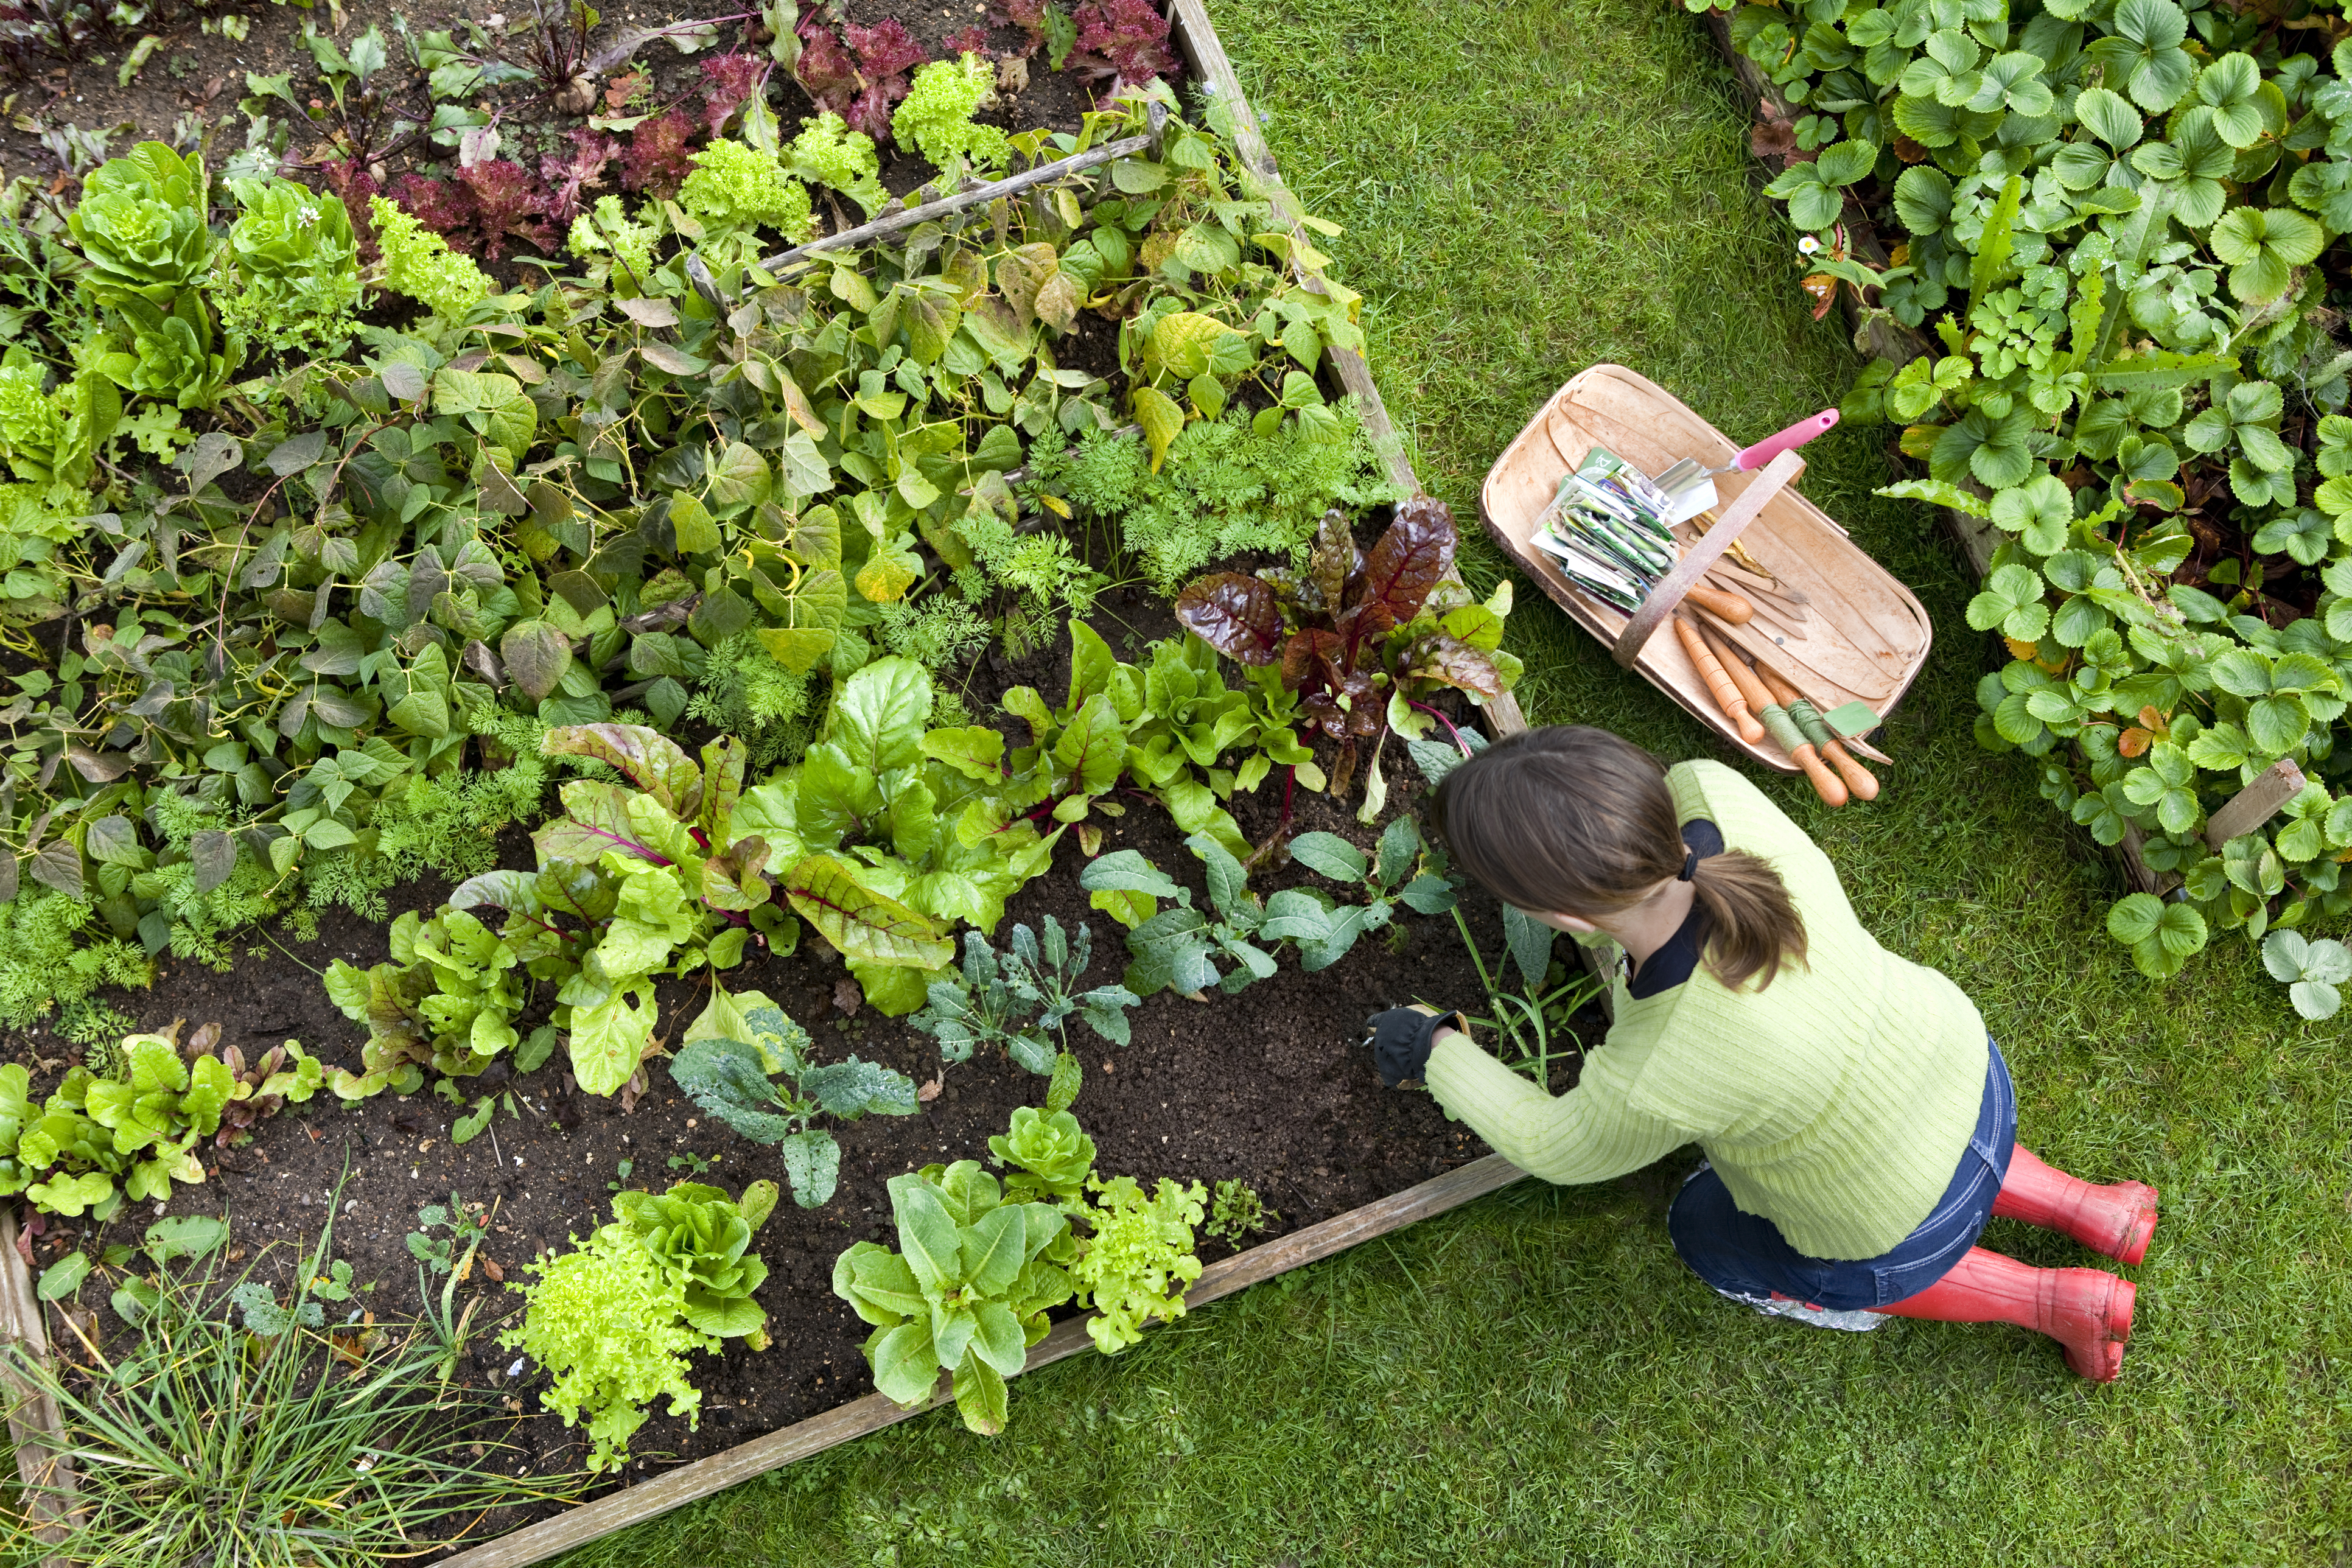 View onto a vegetabel bed. In the style of an augmented reality application, the vegetable bed is covered with button icons showing typical garden crops such as carrots or radishes. A person kneeling at the edge of the bed, is working on the bed and using one of the buttons. 